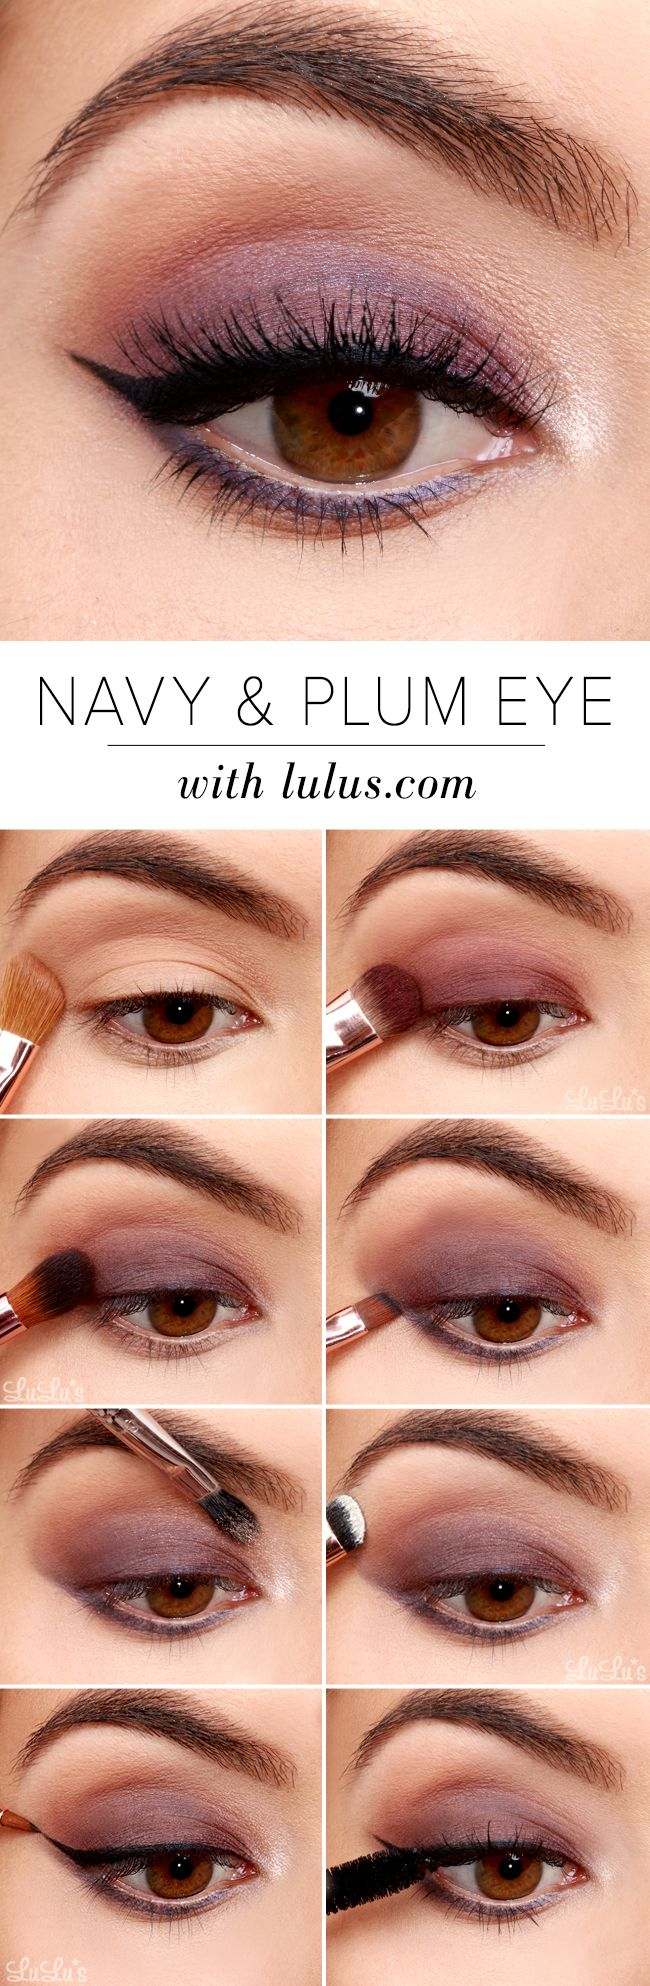 Makeup Tips For Brown Eyes 27 Pretty Makeup Tutorials For Brown Eyes Styles Weekly